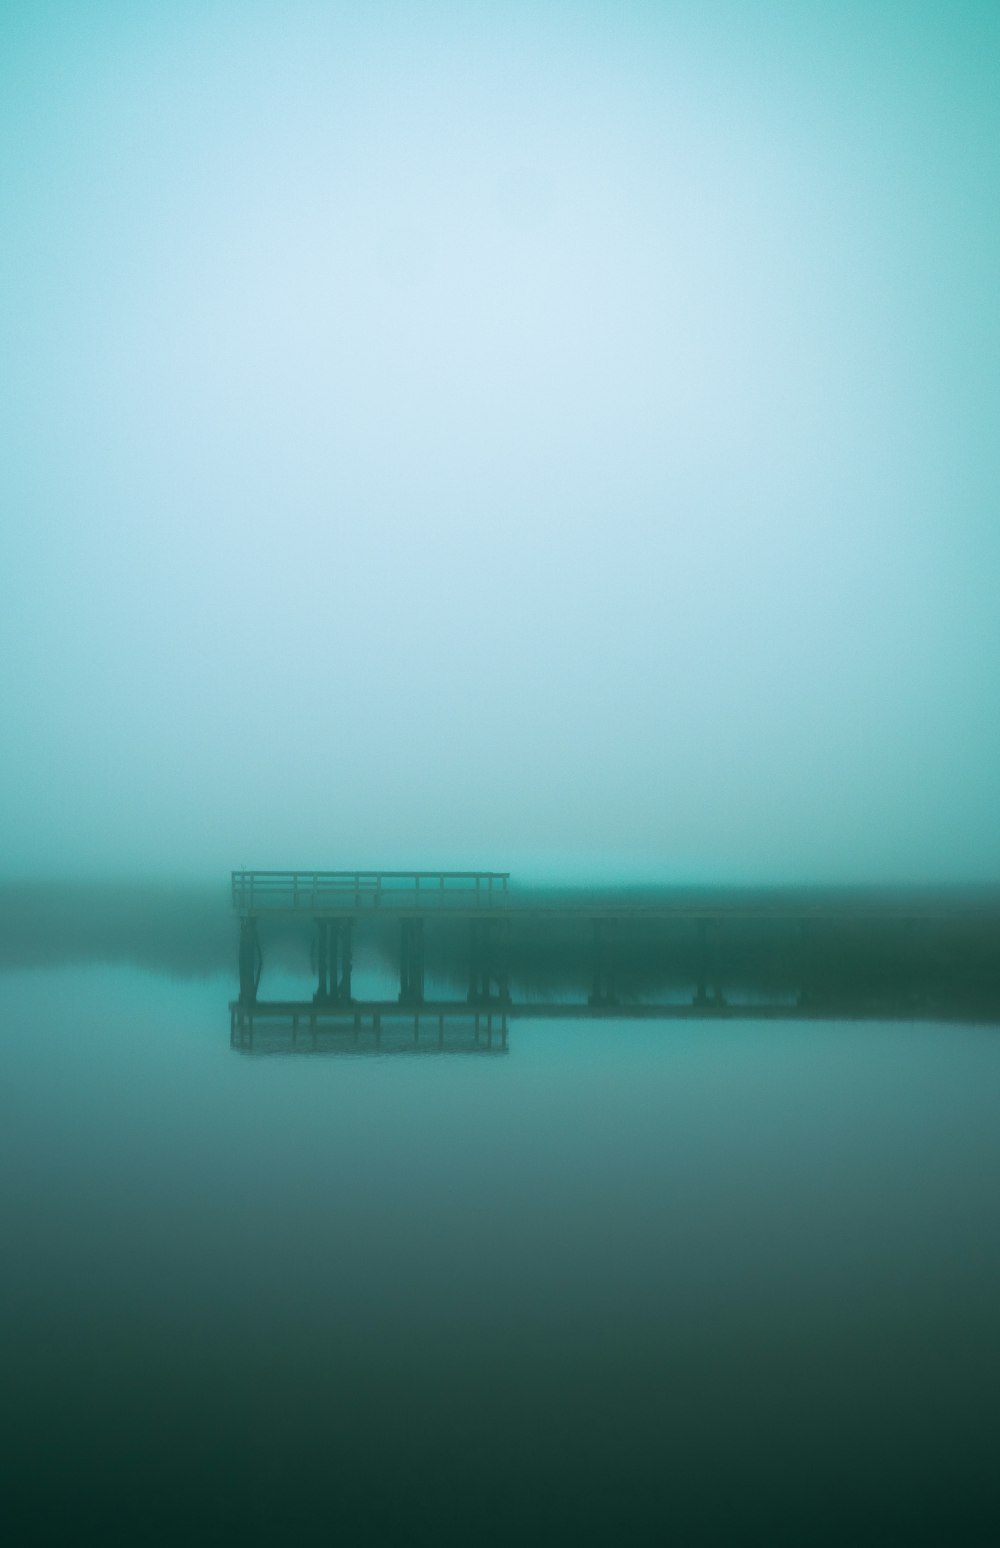 a pier in the middle of a body of water